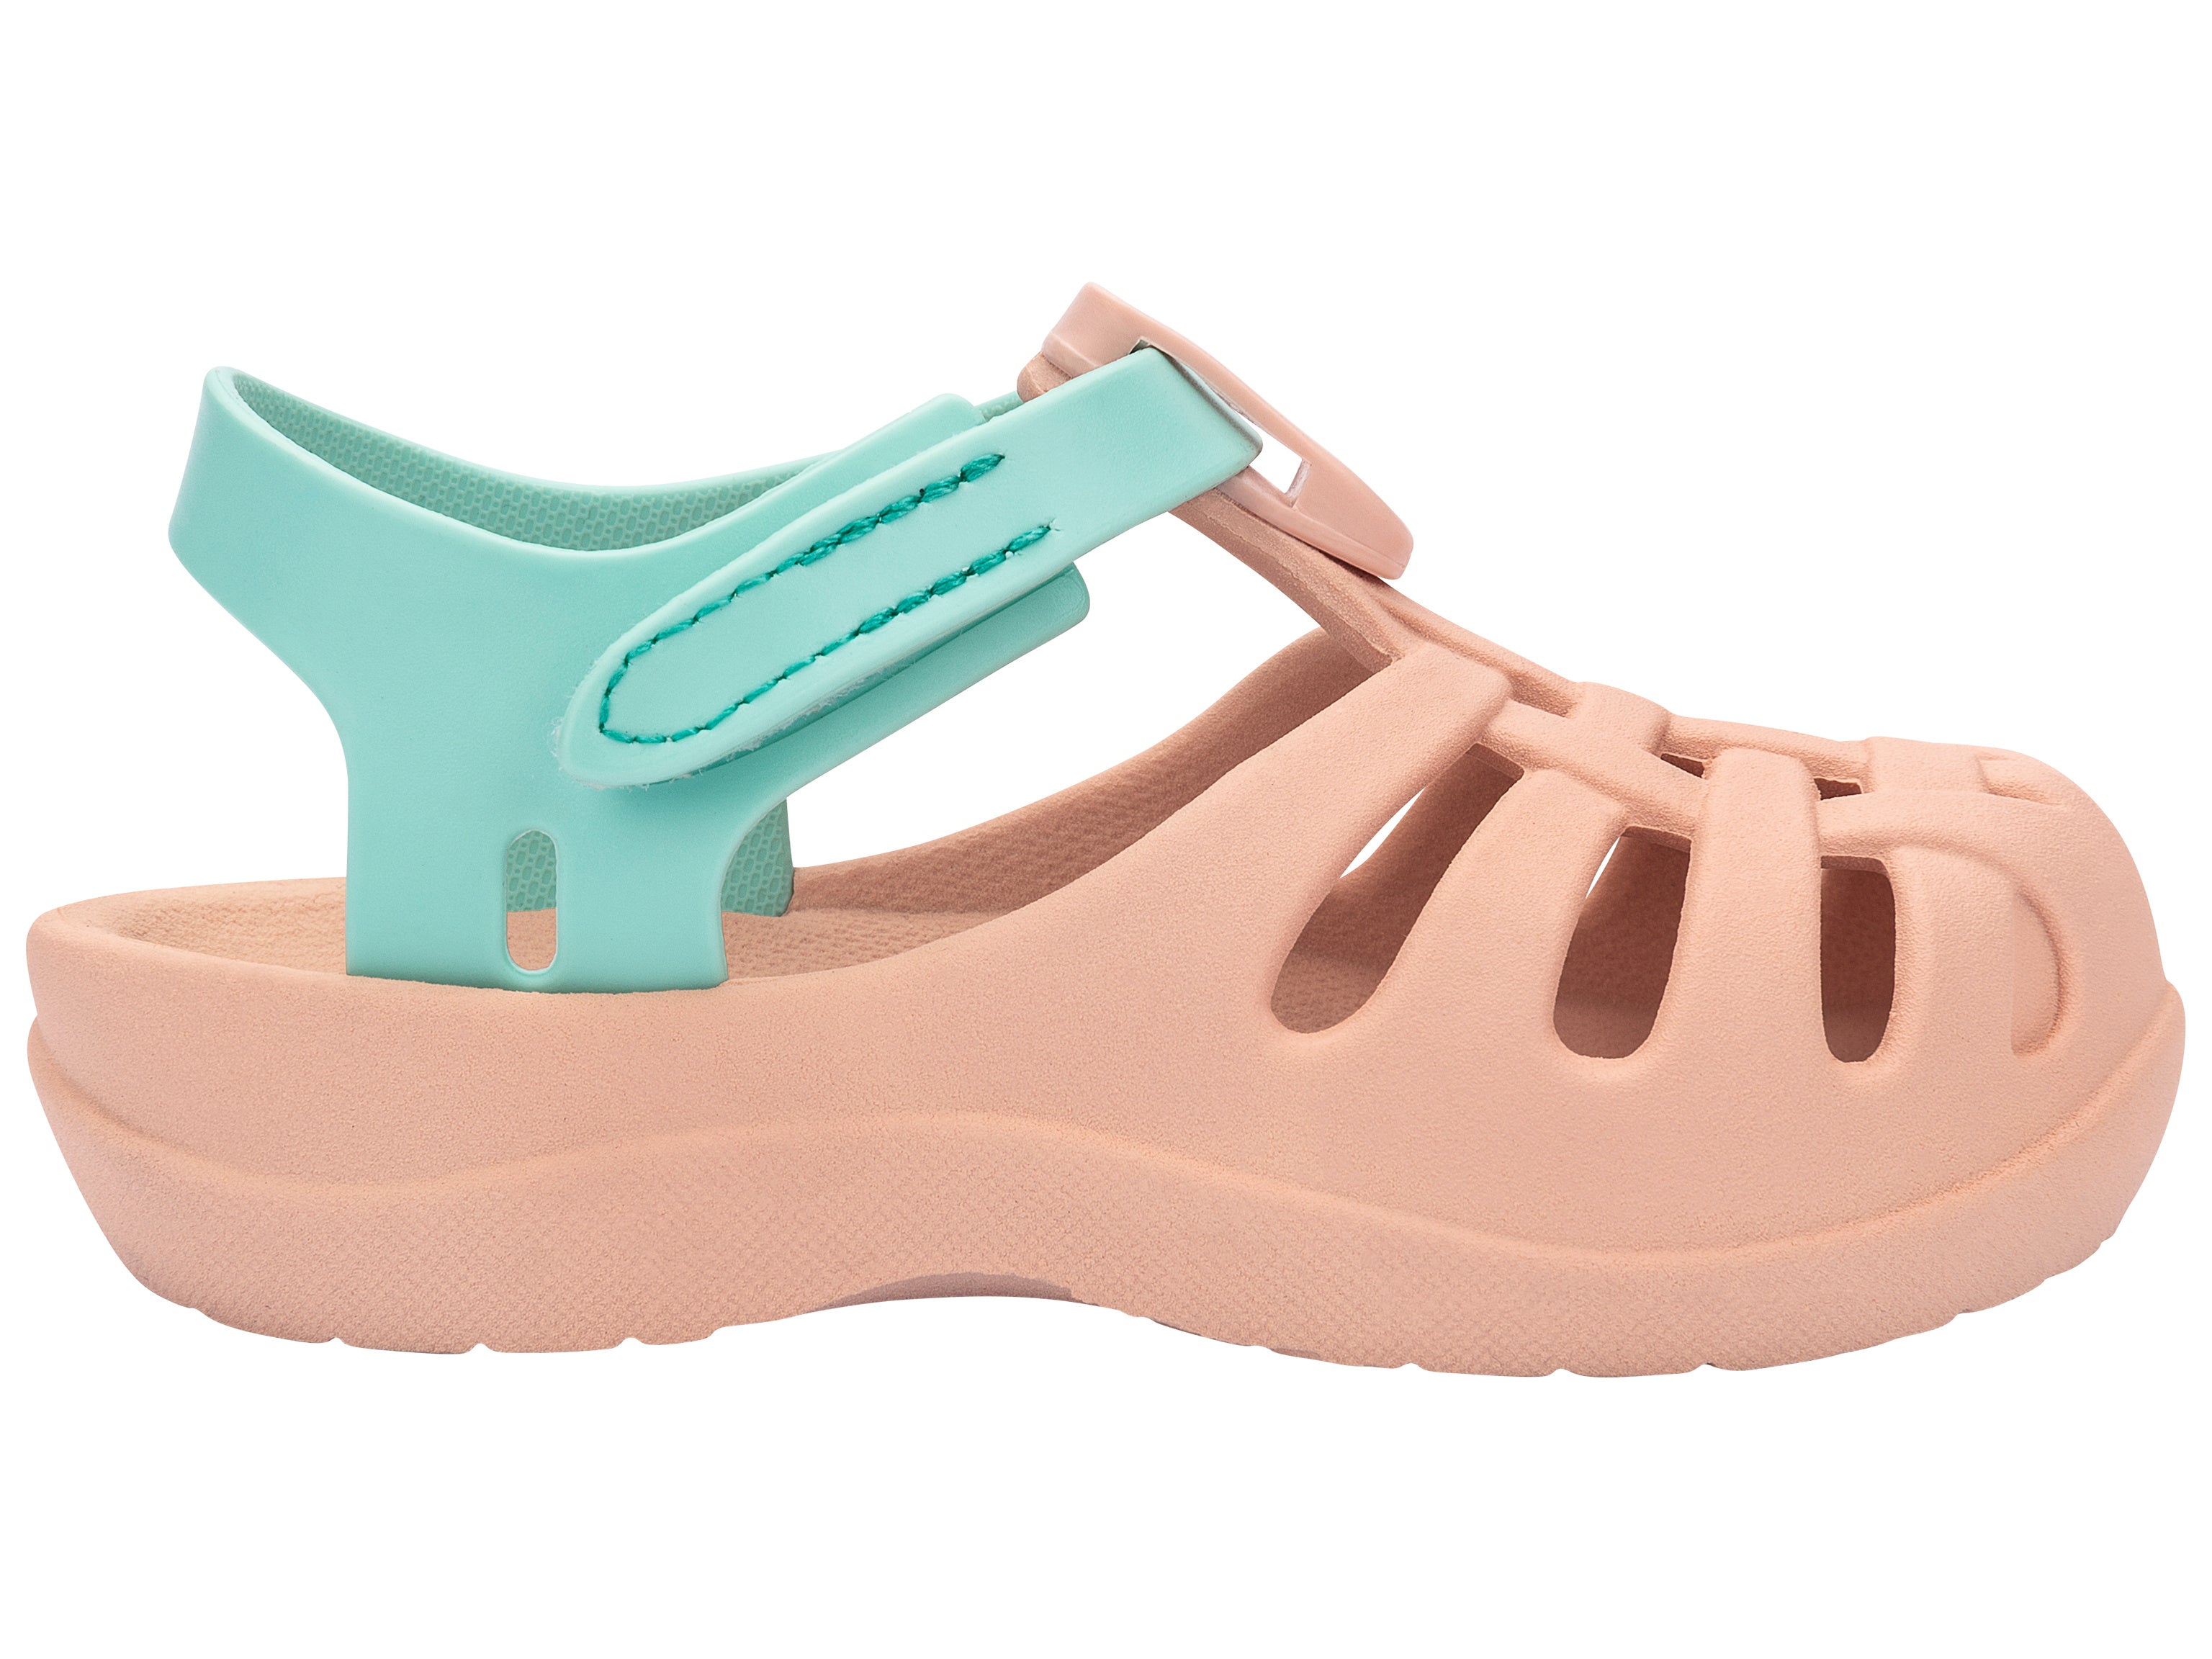 Outer side view of a beige Ipanema Summer Basic baby sandal with green strap.